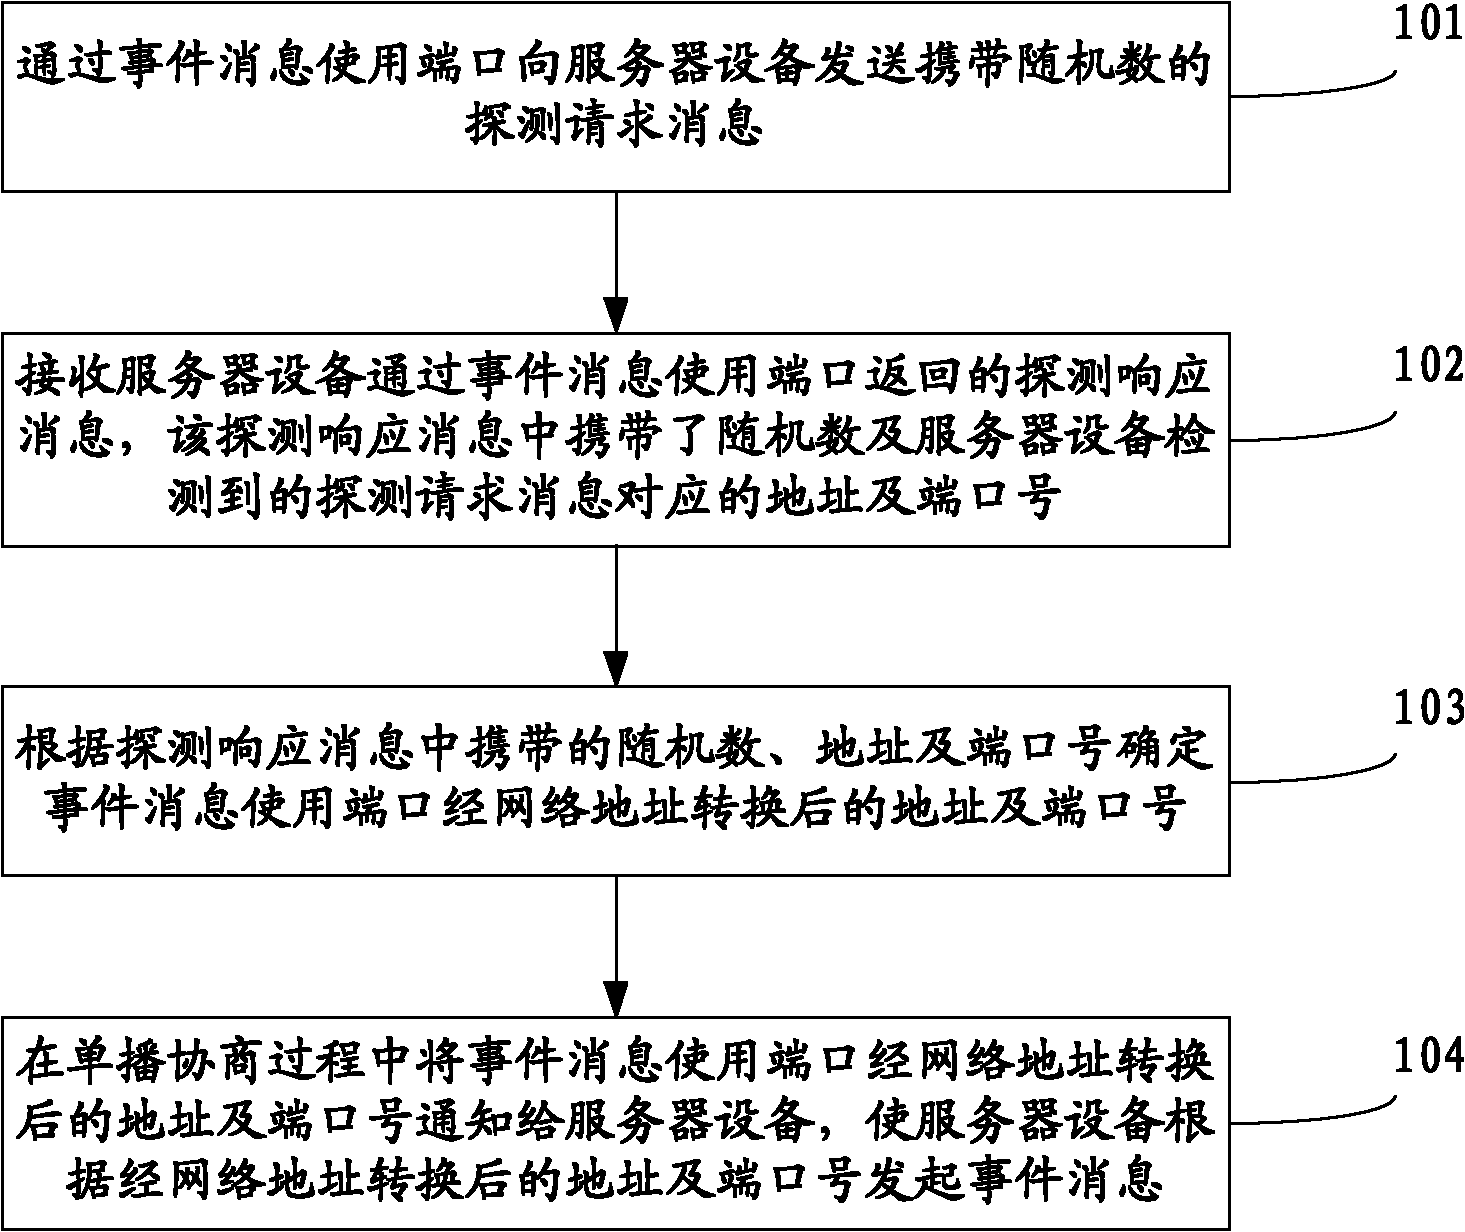 Method for transmitting precision clock synchronization protocol messages, apparatus and system thereof